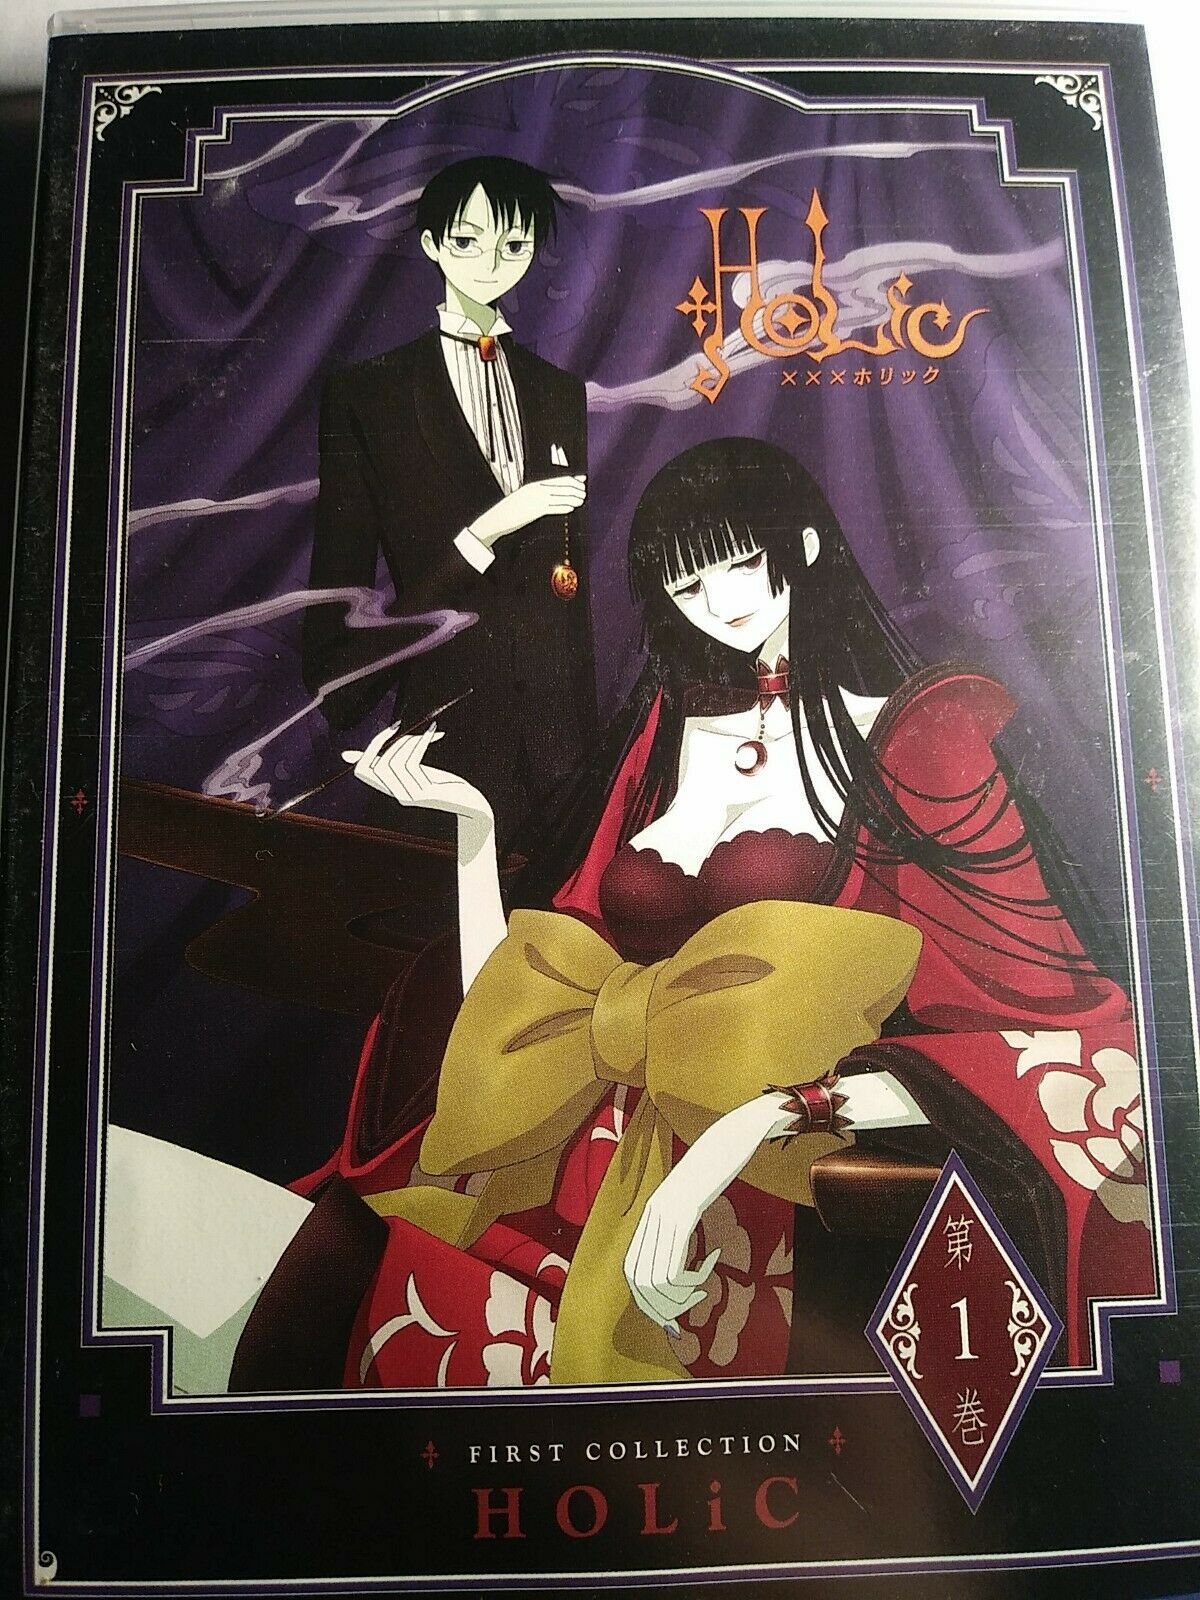 XXXHolic: First Collection - Darkside Records